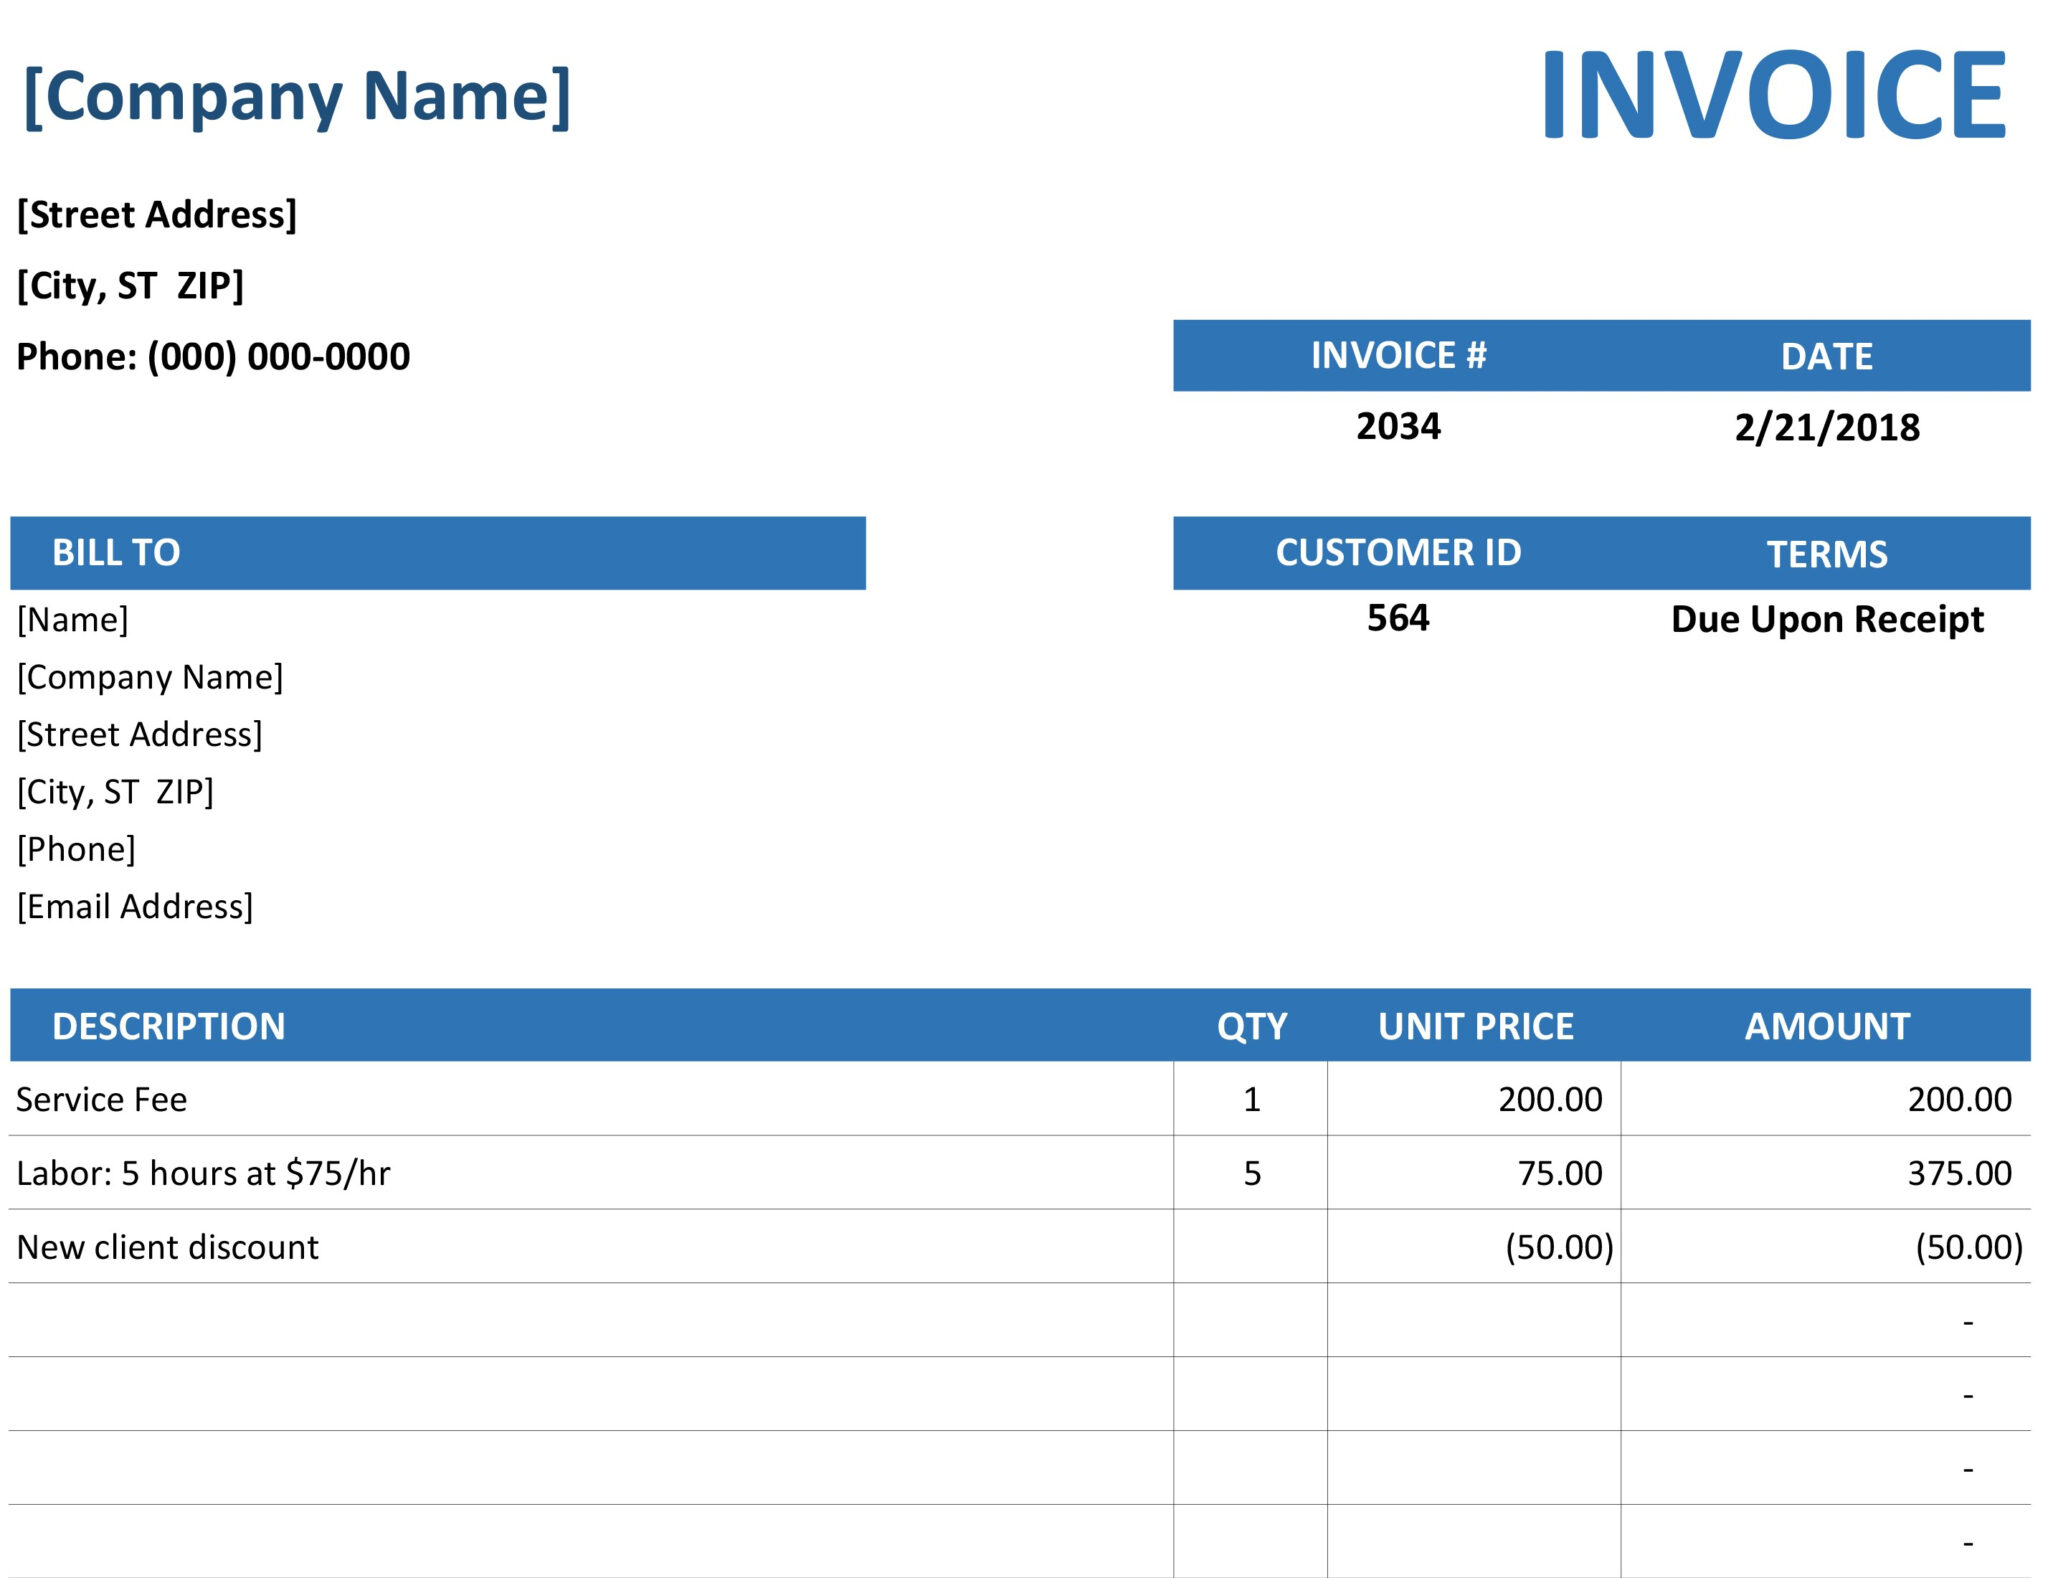 invoice-formats-word-gaseholy